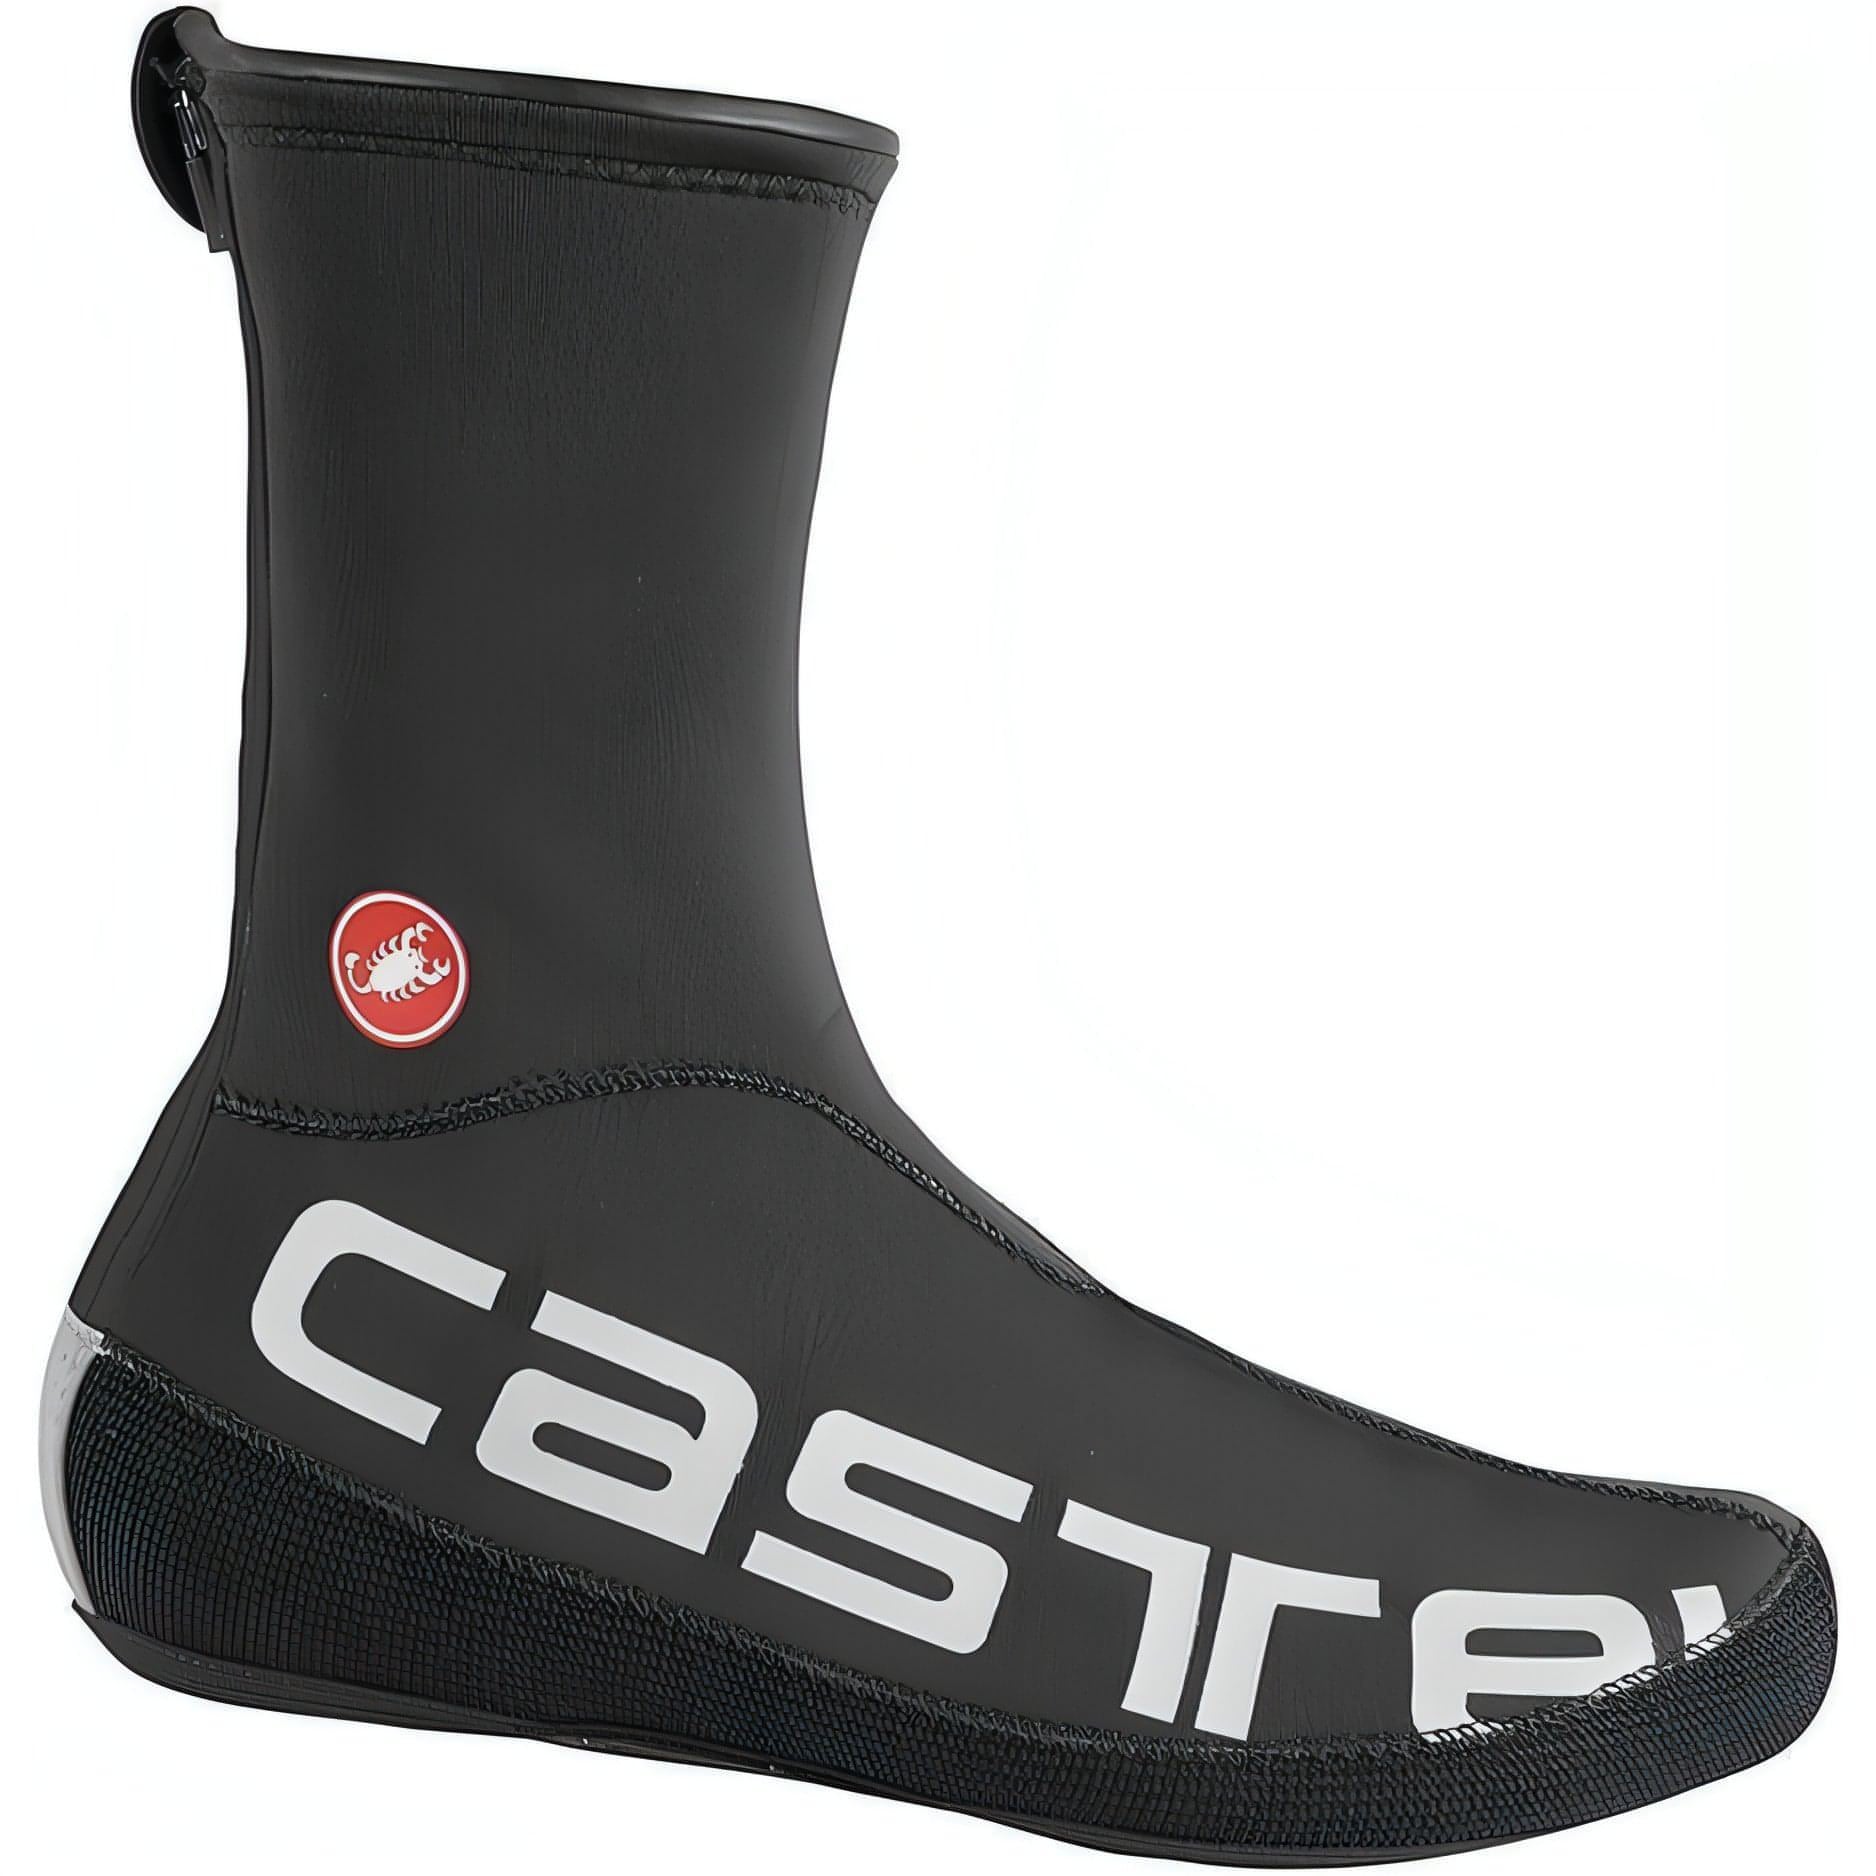 Castelli Diluvio UL Cycling Shoe Cover - Black 8050949226476 - Start Fitness